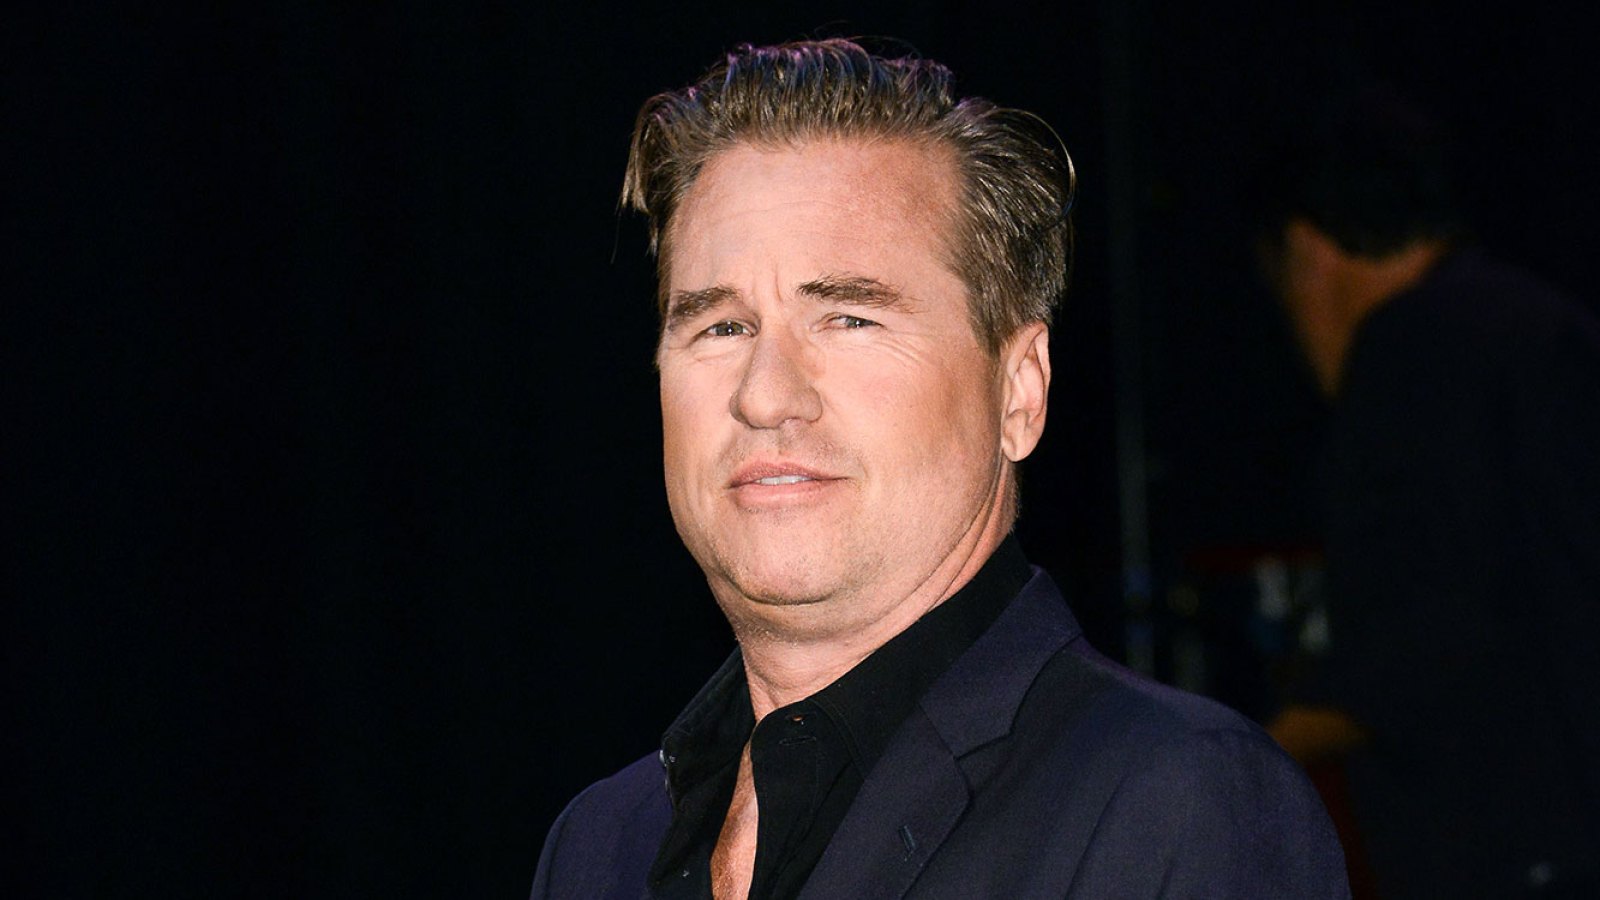 Val Kilmer Says He Was Offered Role in Top Gun 2: “Let’s Fire Up Some Fighter Jets!”